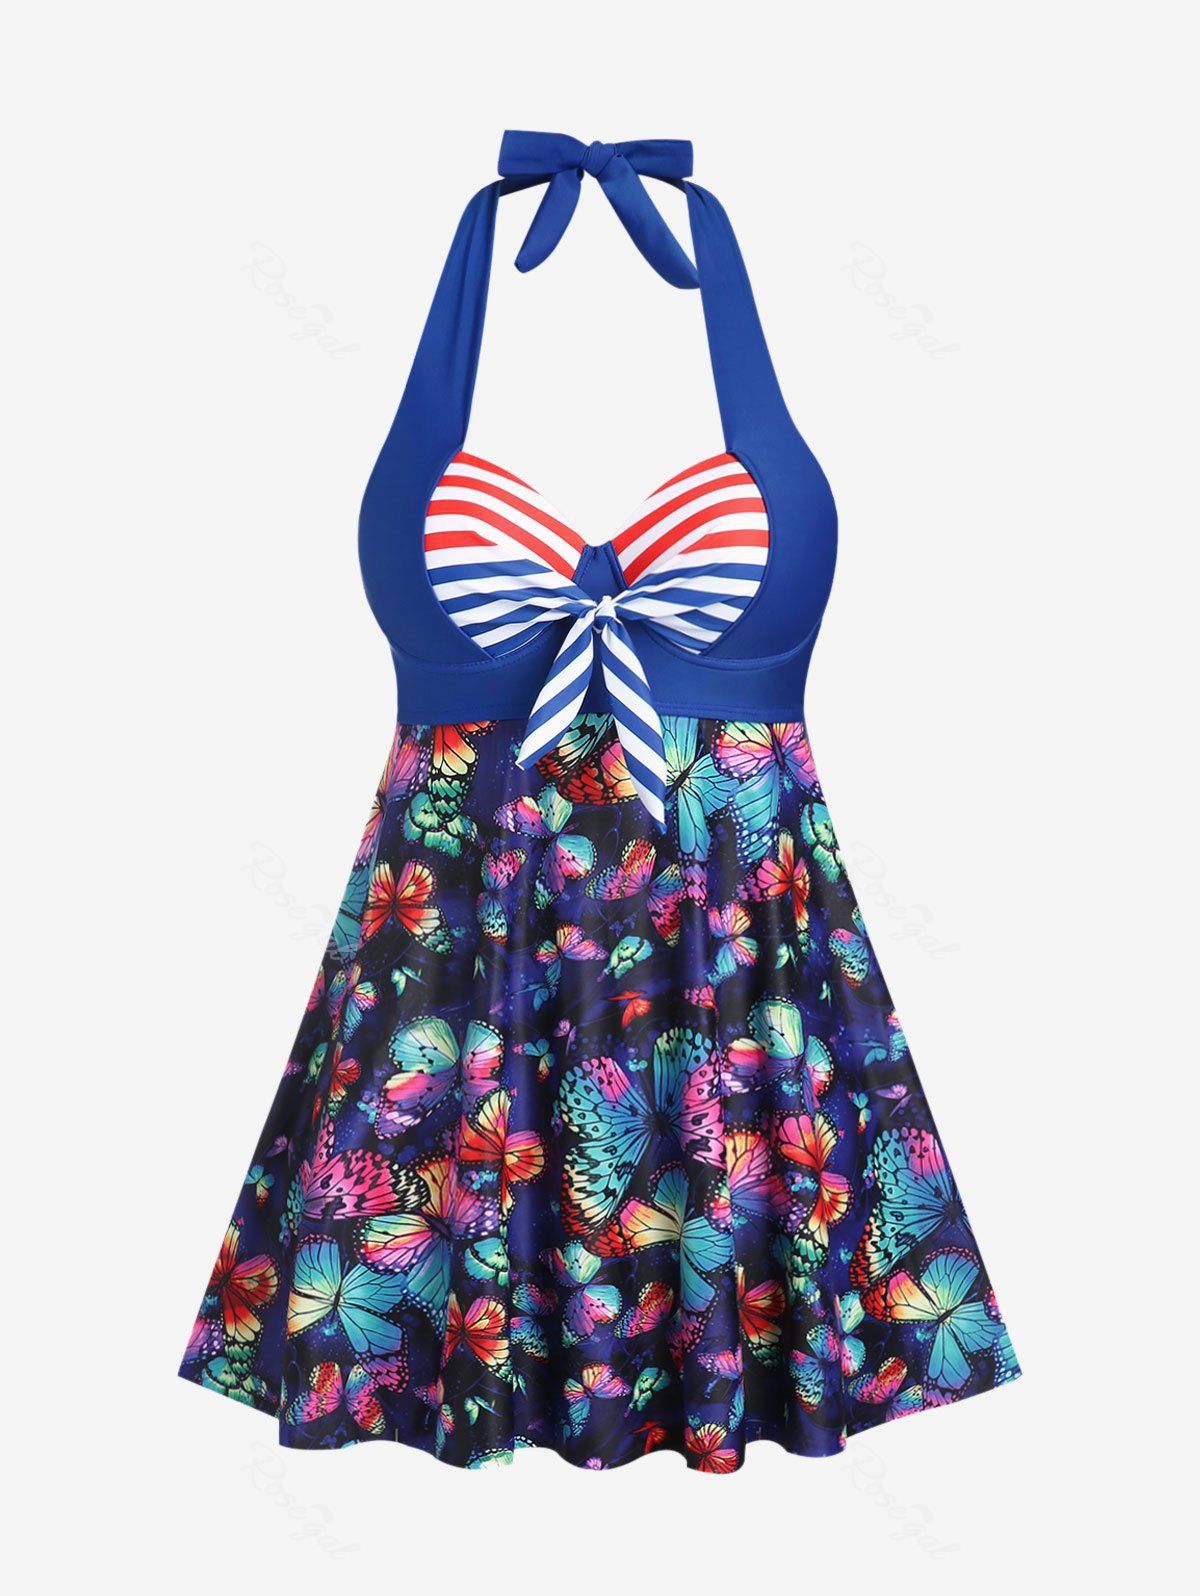 Store Plus Size Halter Patriotic American Flag Butterfly Print Tankini Top  